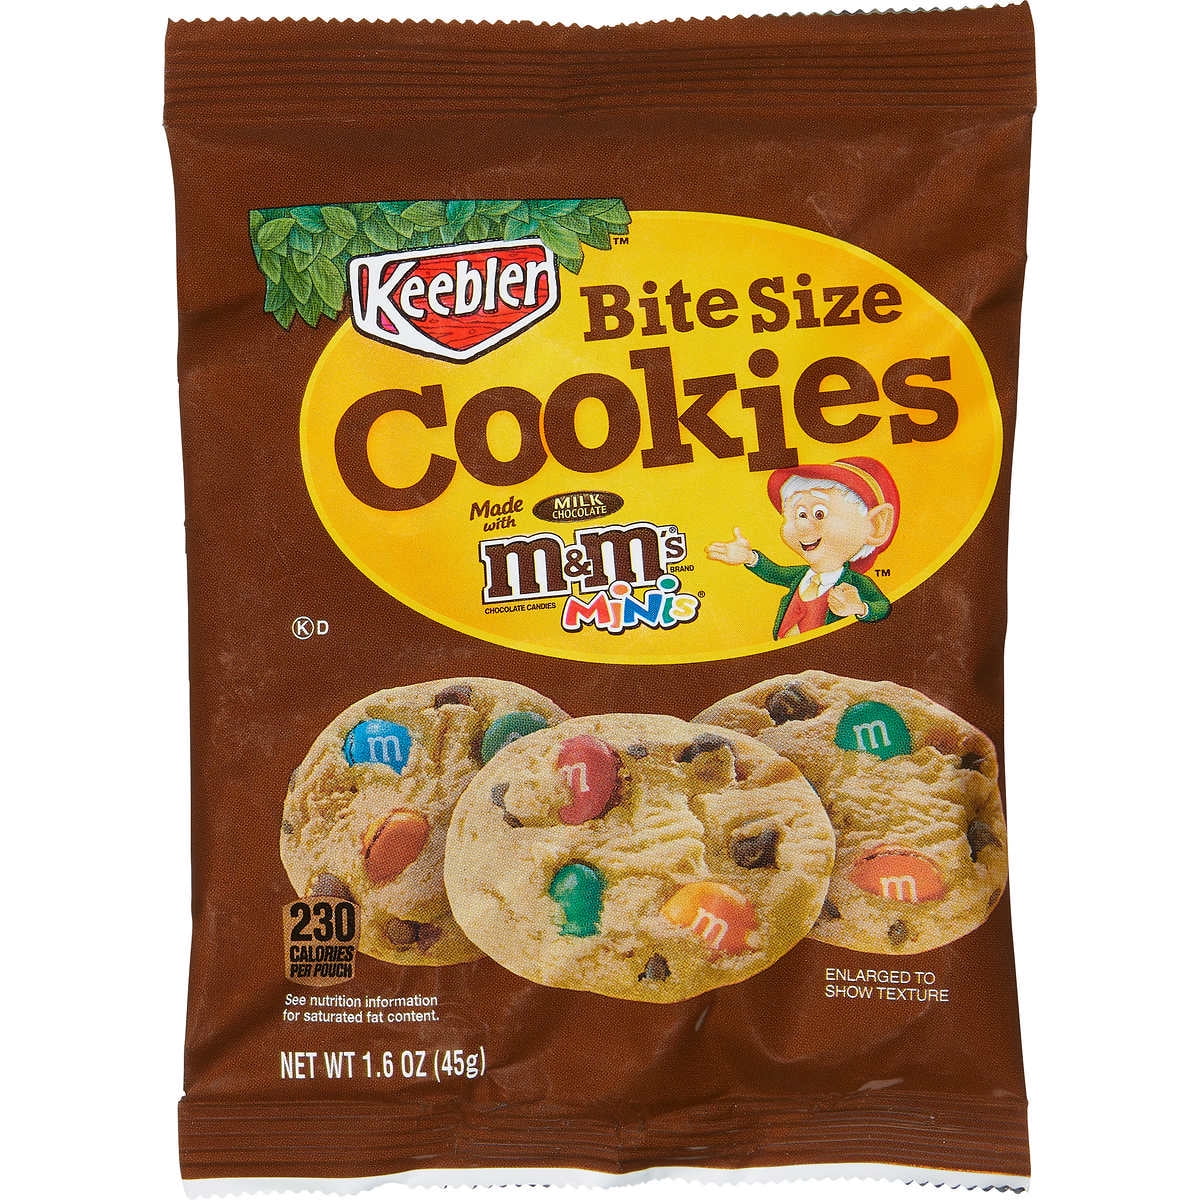 Keebler Bite Size Cookies made with Milk Chocolate M&M's Minis